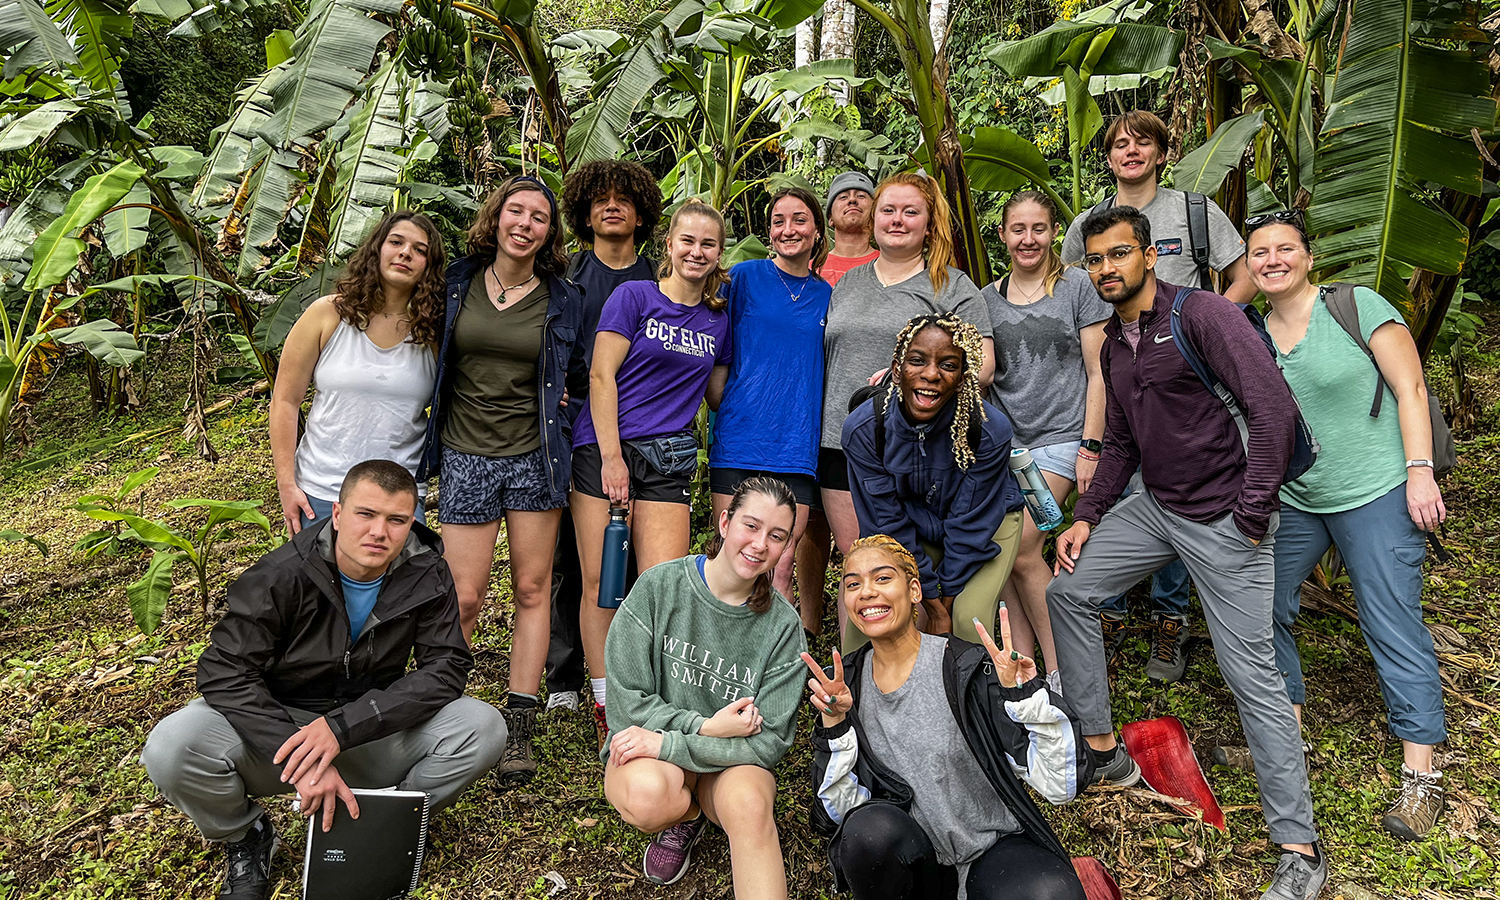 Group photo in Costa Rica